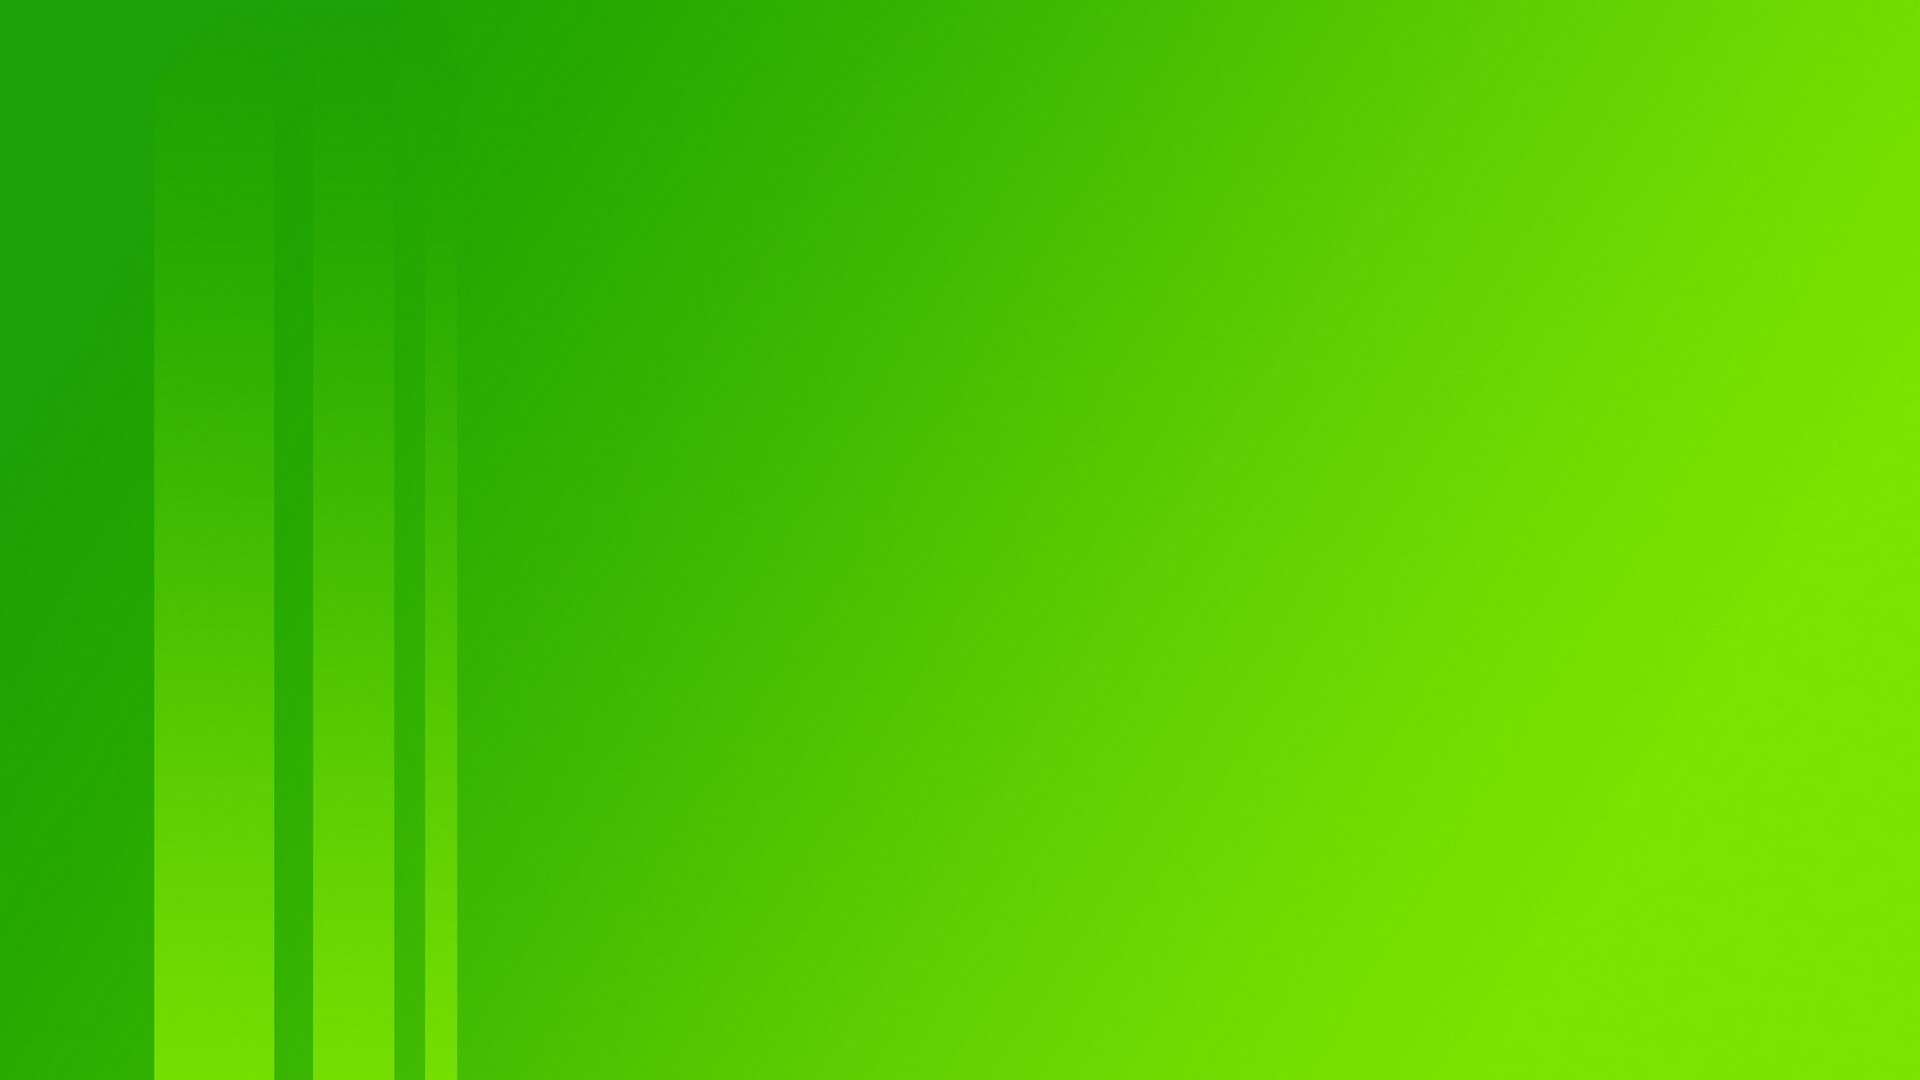 Solid Green Background Wallpaper